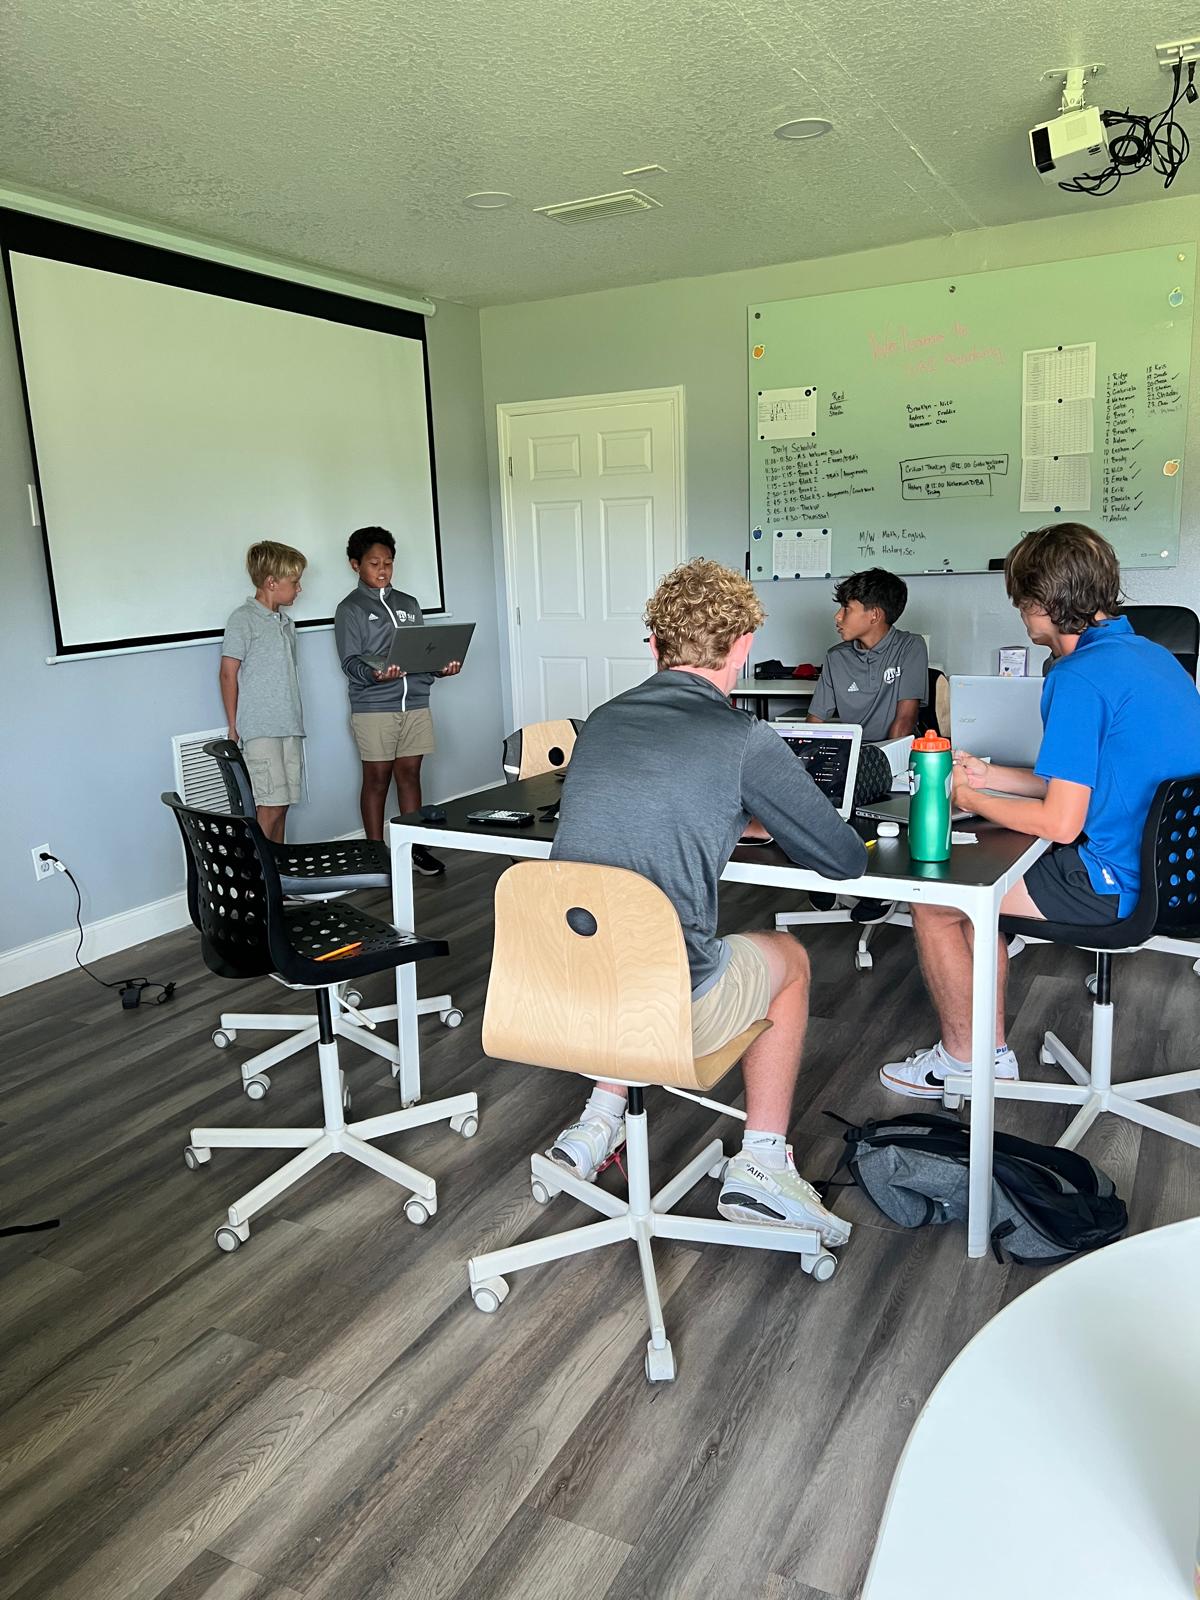 Students in a classroom setting, with two standing and presenting at the front while three others sit and work at a table with laptops and notebooks. A whiteboard displays information about SAI Soccer Academy, complementing the projector screen's detailed diagrams.